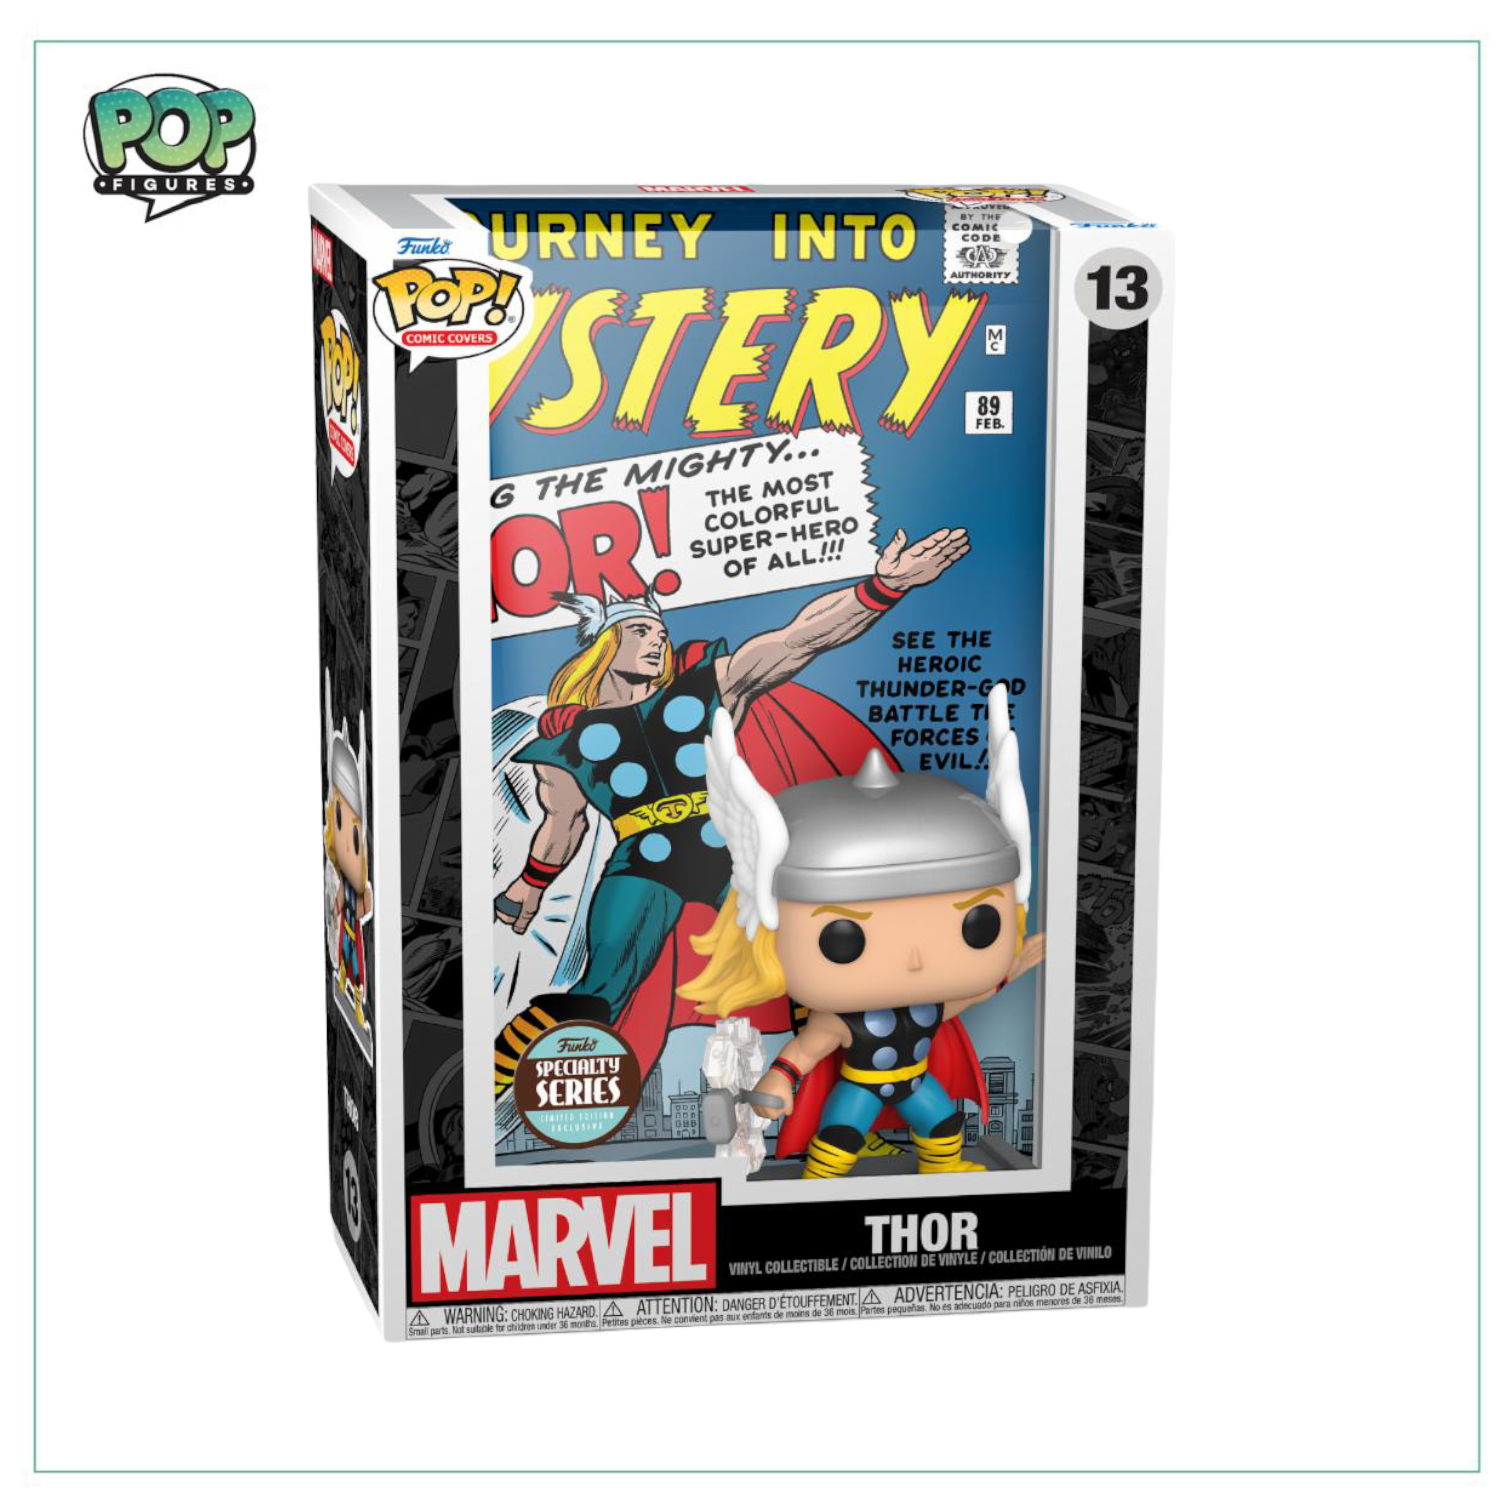 Thor #13 Specialty Series Funko Pop! Comic Cover Marvel